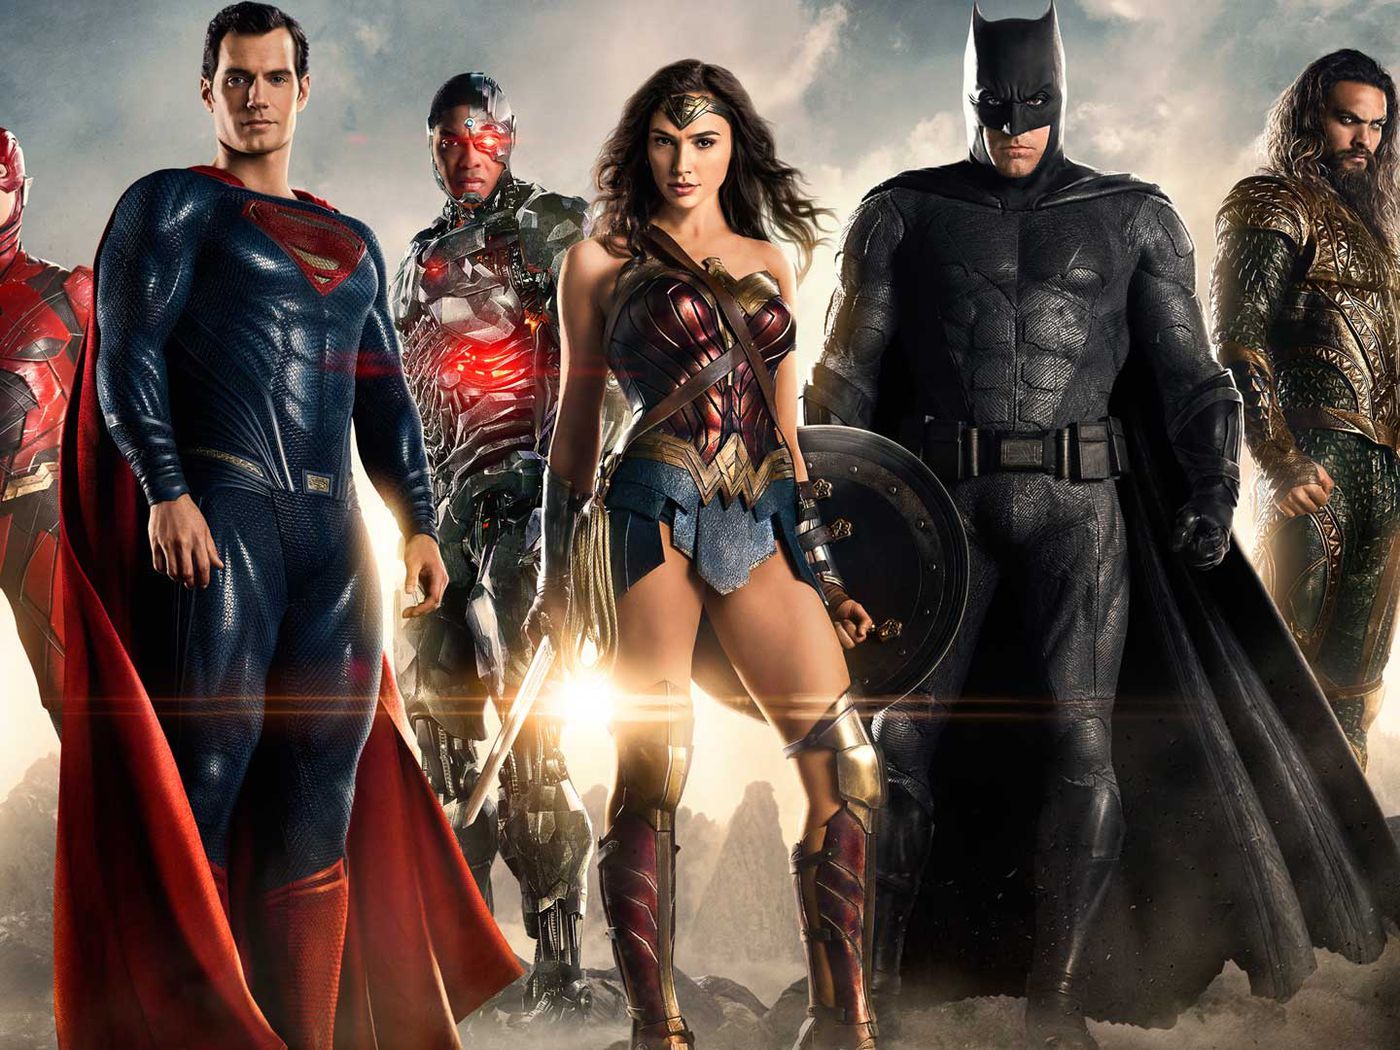 Every upcoming DC movie release date, rumor, and planned spinoff